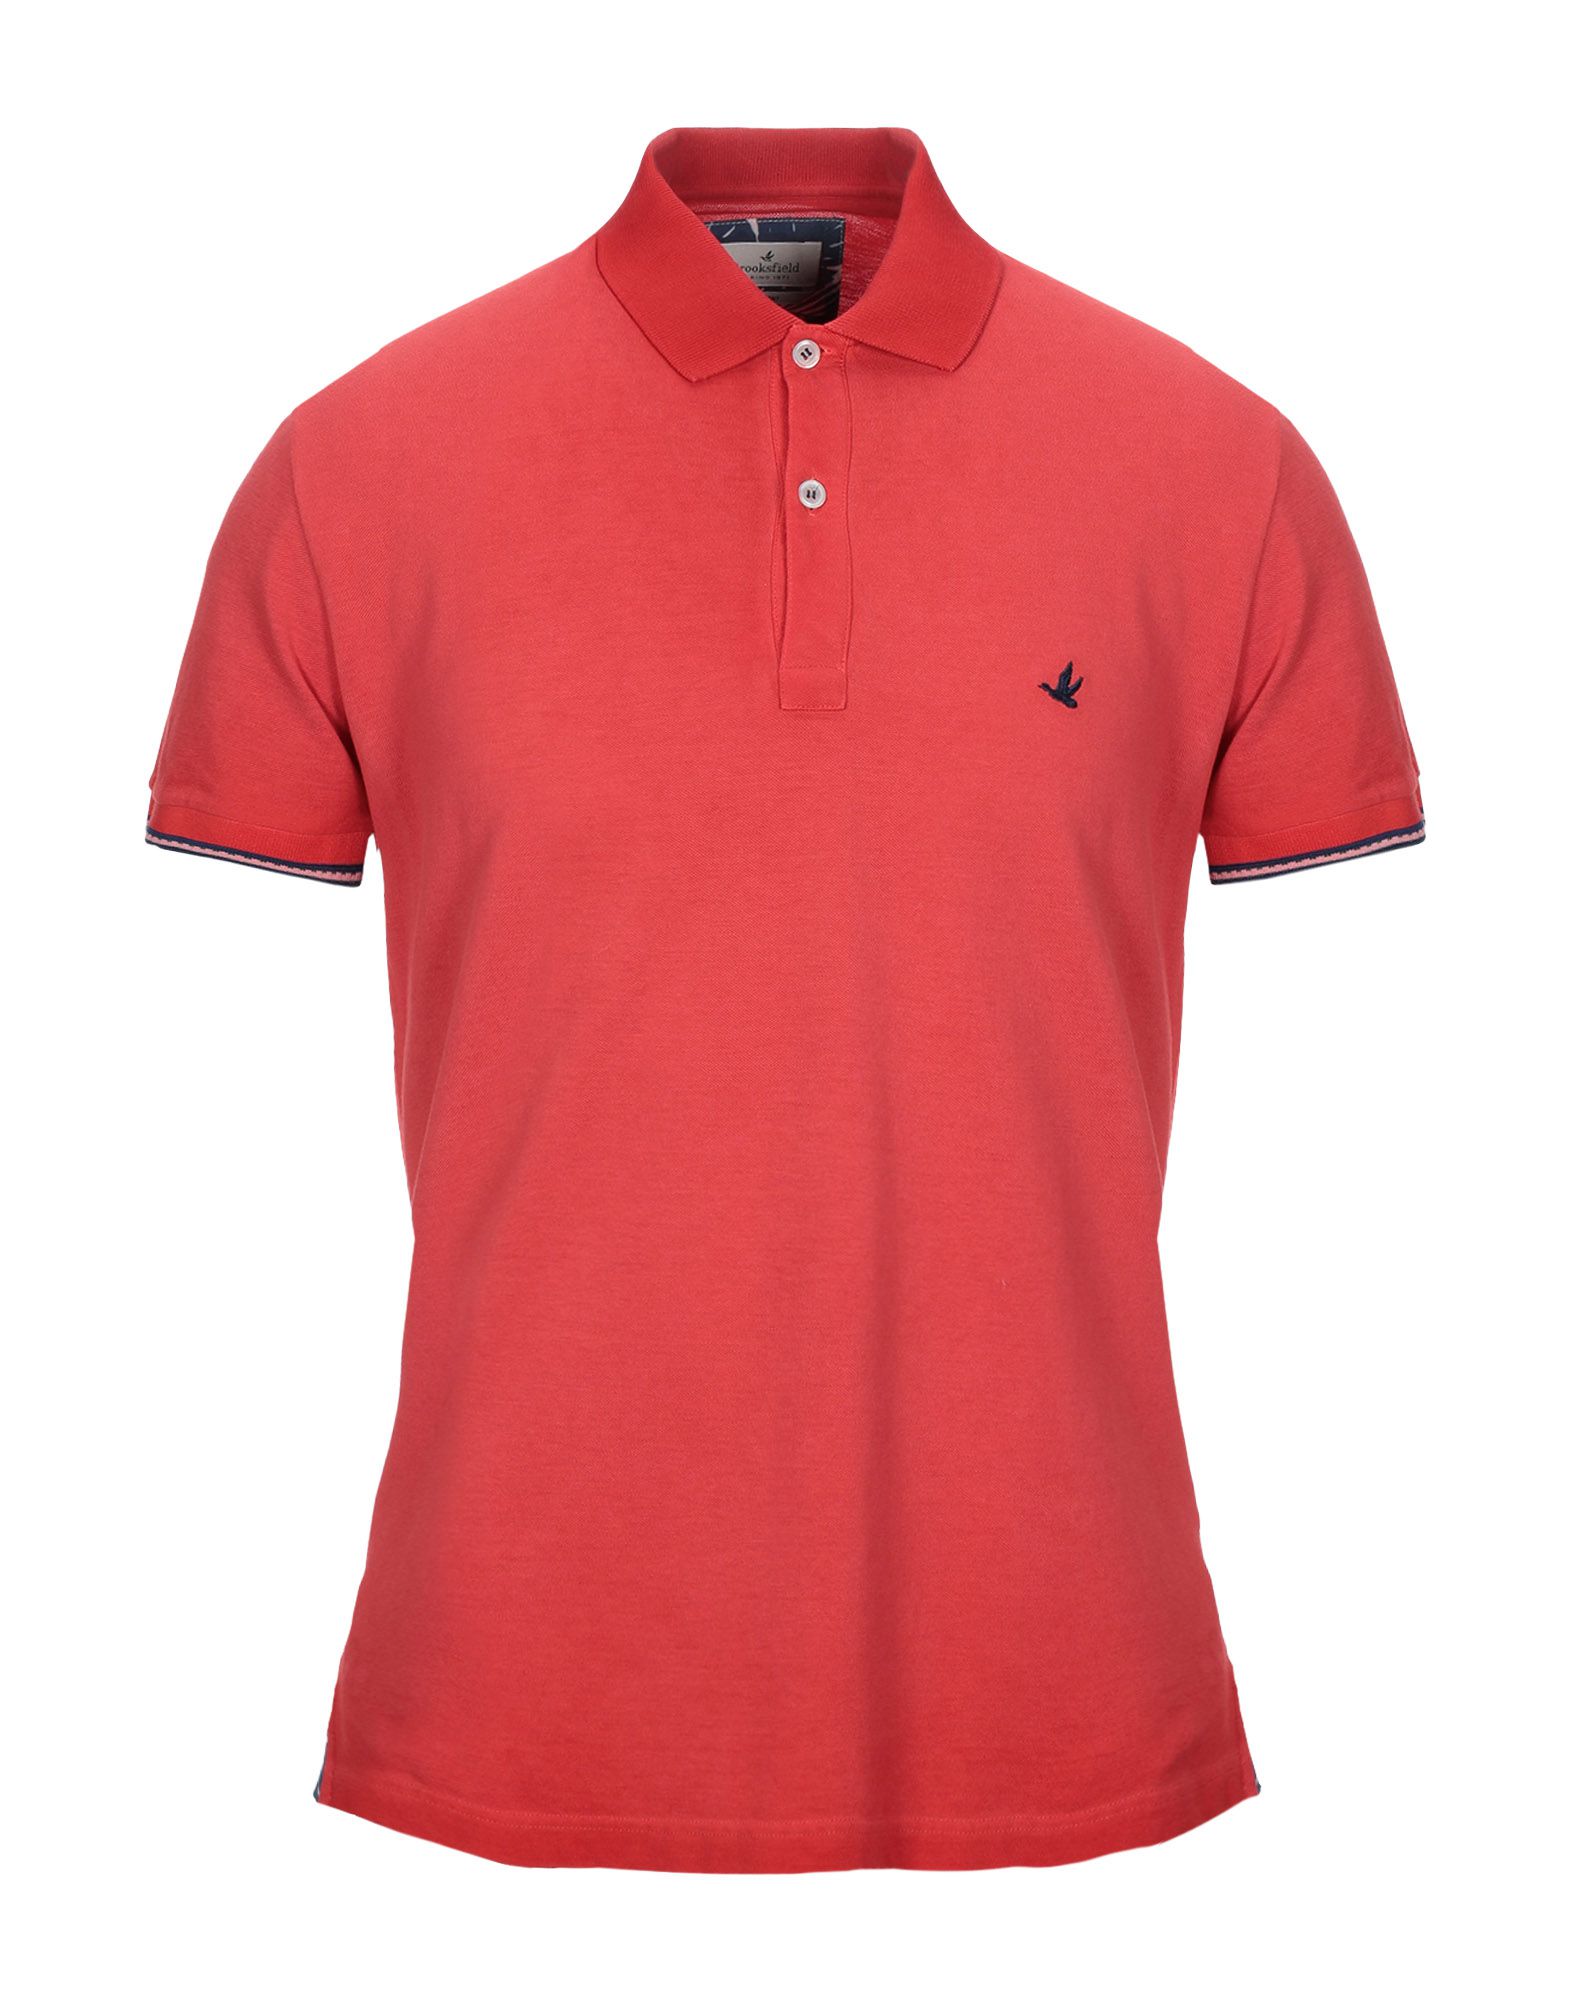 BROOKSFIELD BROOKSFIELD MAN POLO SHIRT RED SIZE 36 COTTON